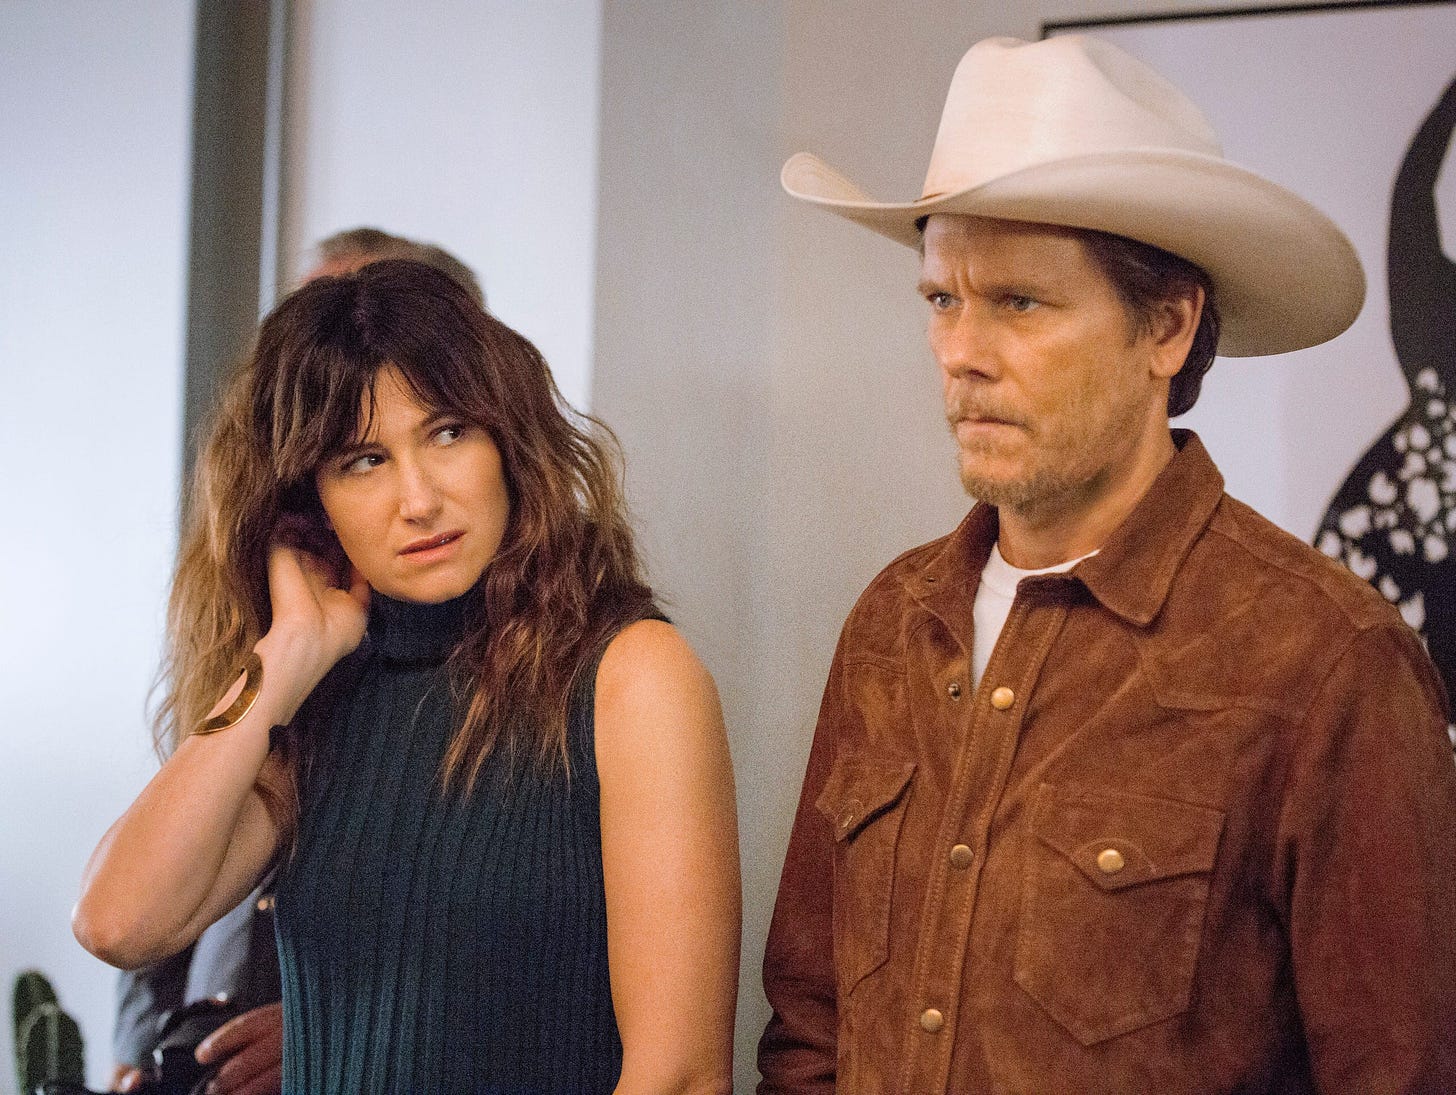 Chris (Kathryn Hahn) begins to fixate on Dick (Kevin Bacon), despite the fact that she's married.